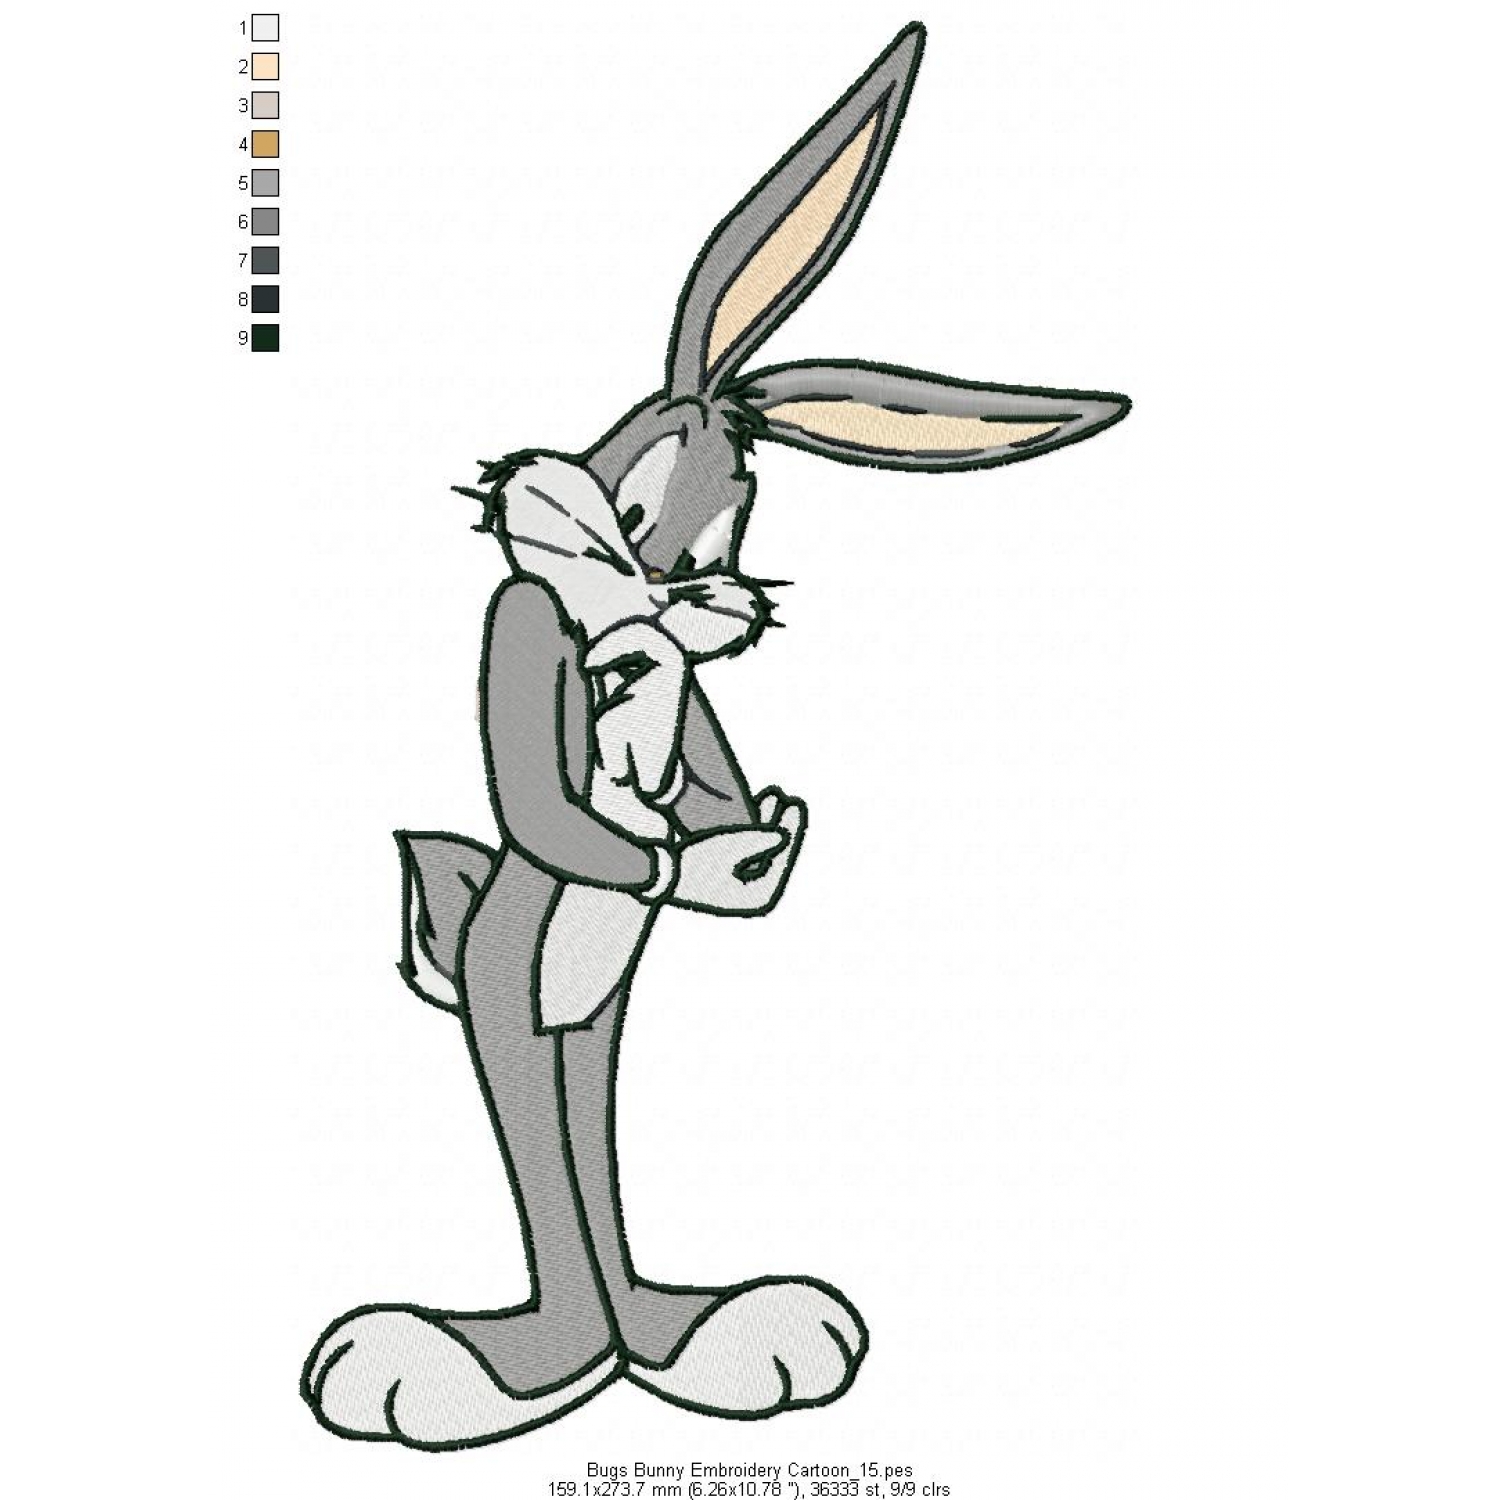 Bugs Bunny Embroidery Designs - Looney Tunes Bugs Bunny 12 Embroidery Desig...